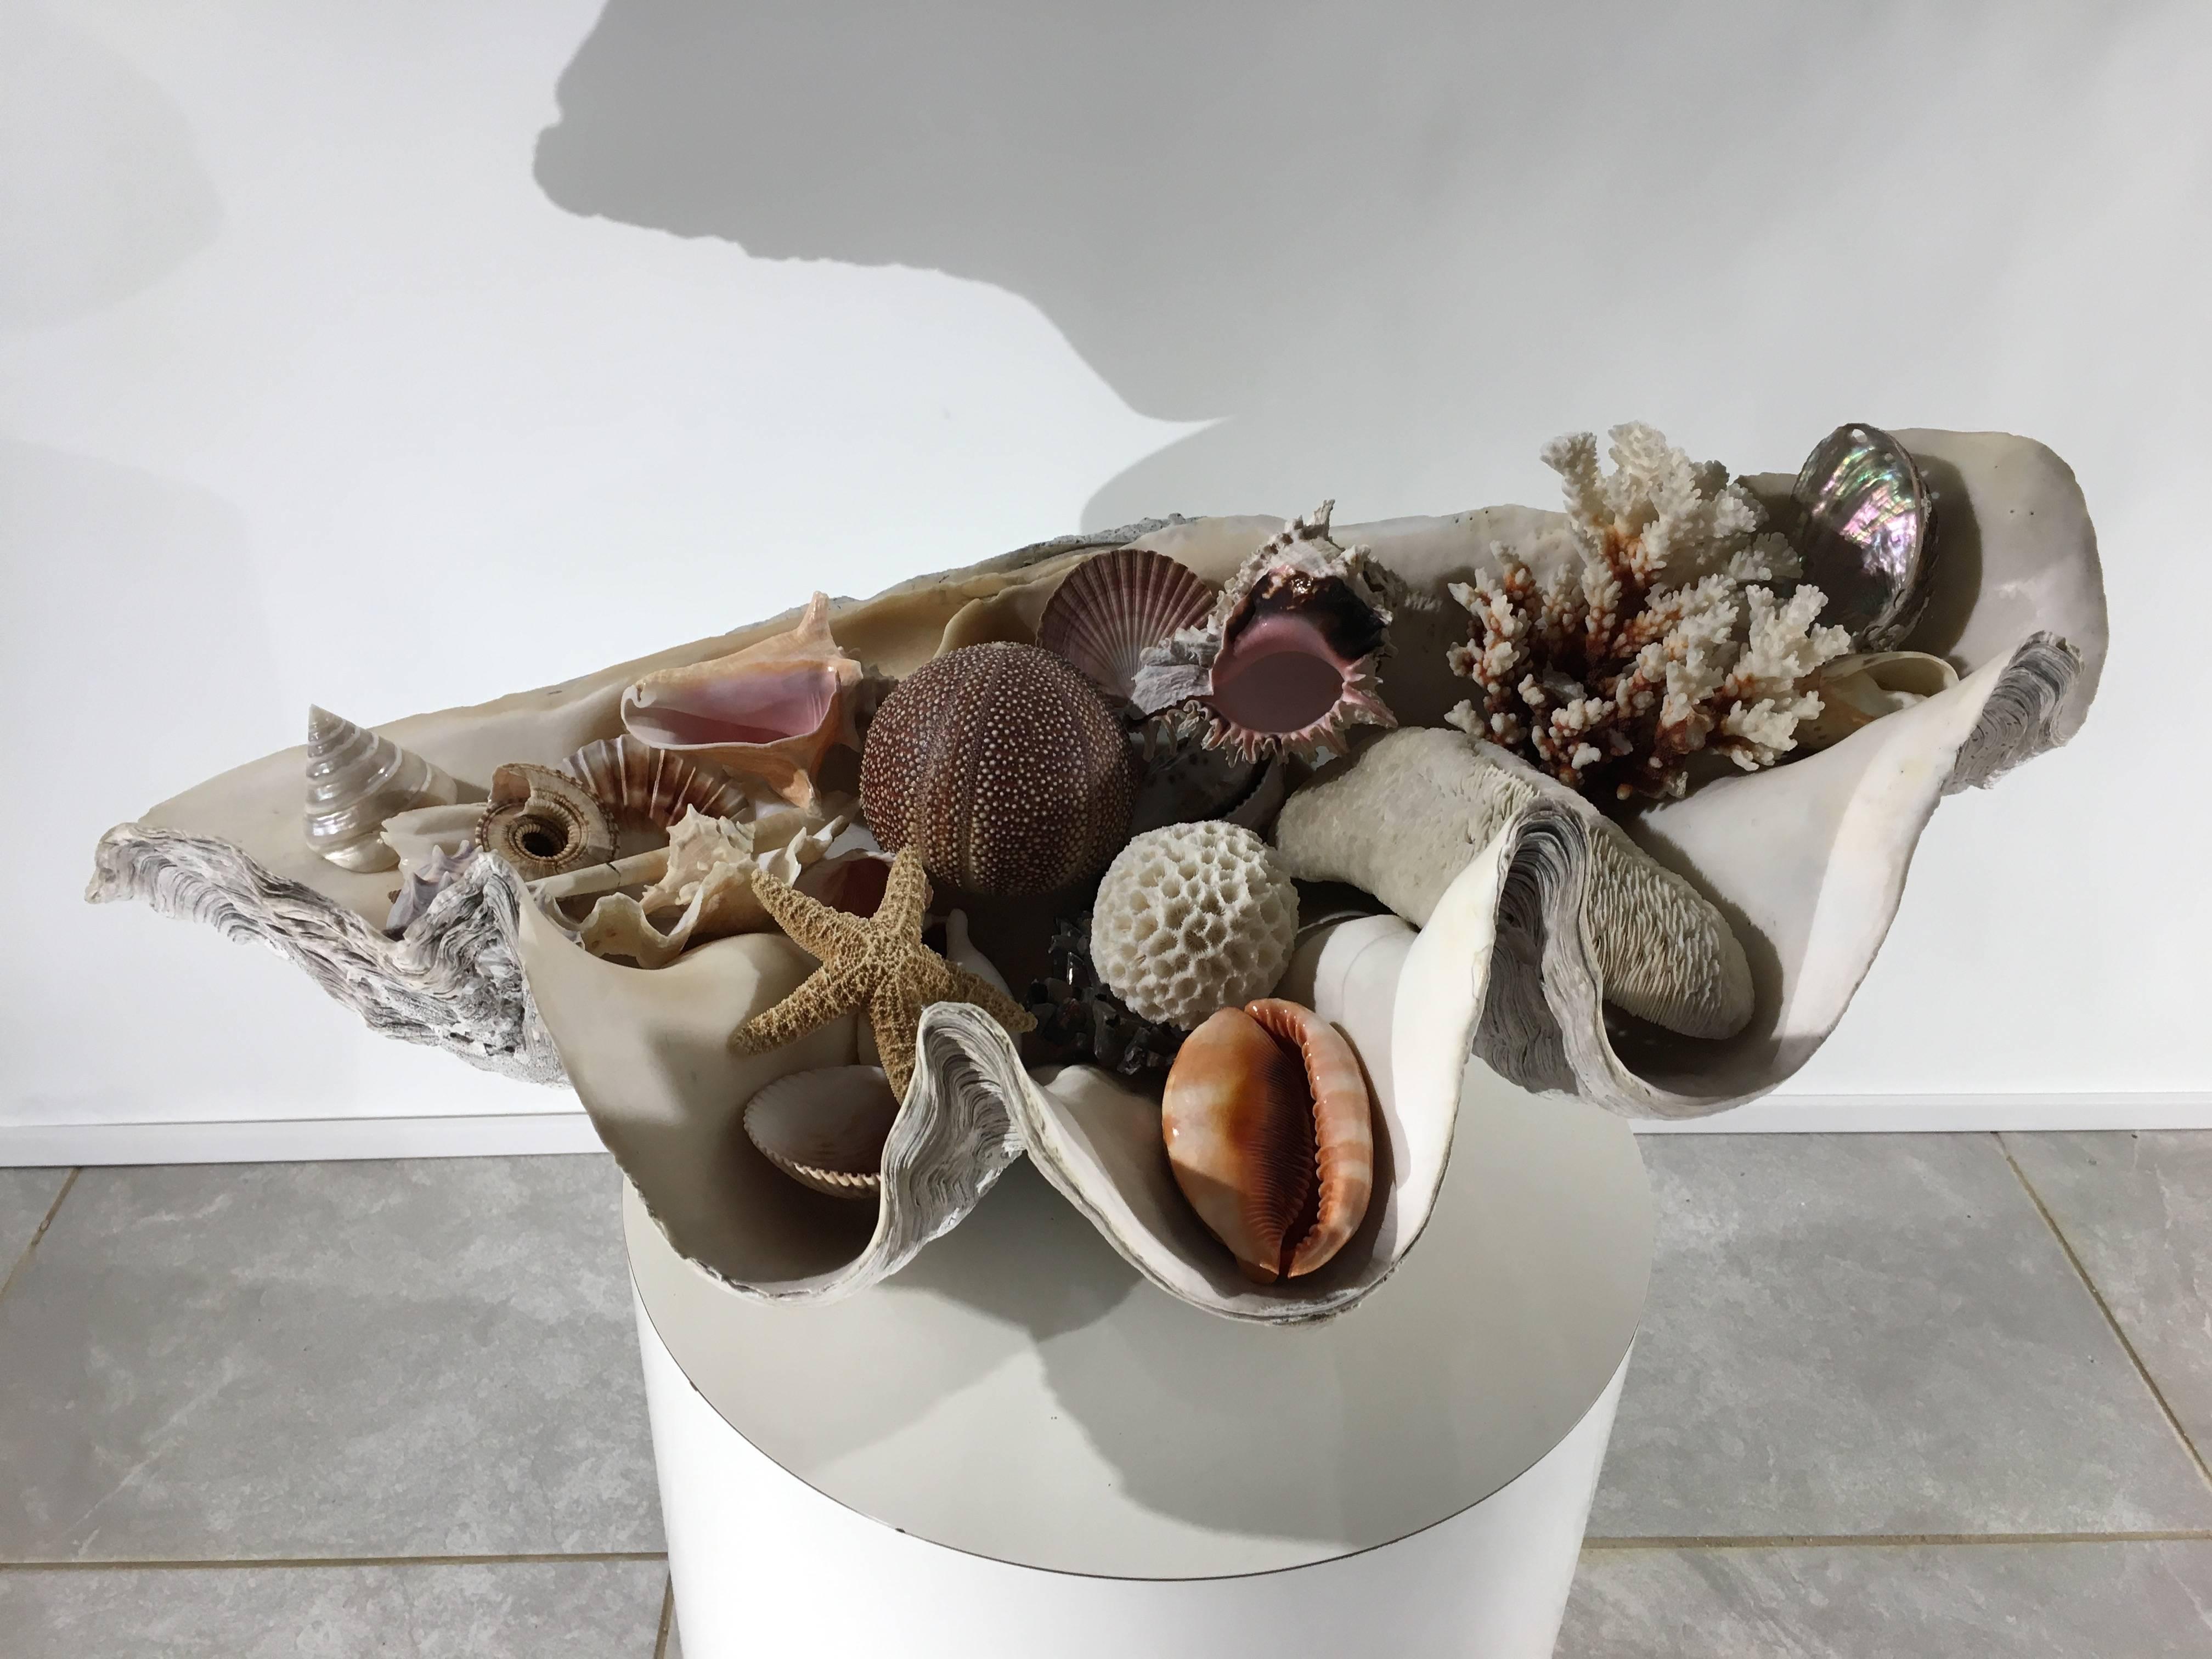 A vintage Giant Clam shell from the South Pacific Ocean displayed with and including various ocean corals, shell's and a Starfish. All hand picked for their beauty. 
Measures: Shell width is 30